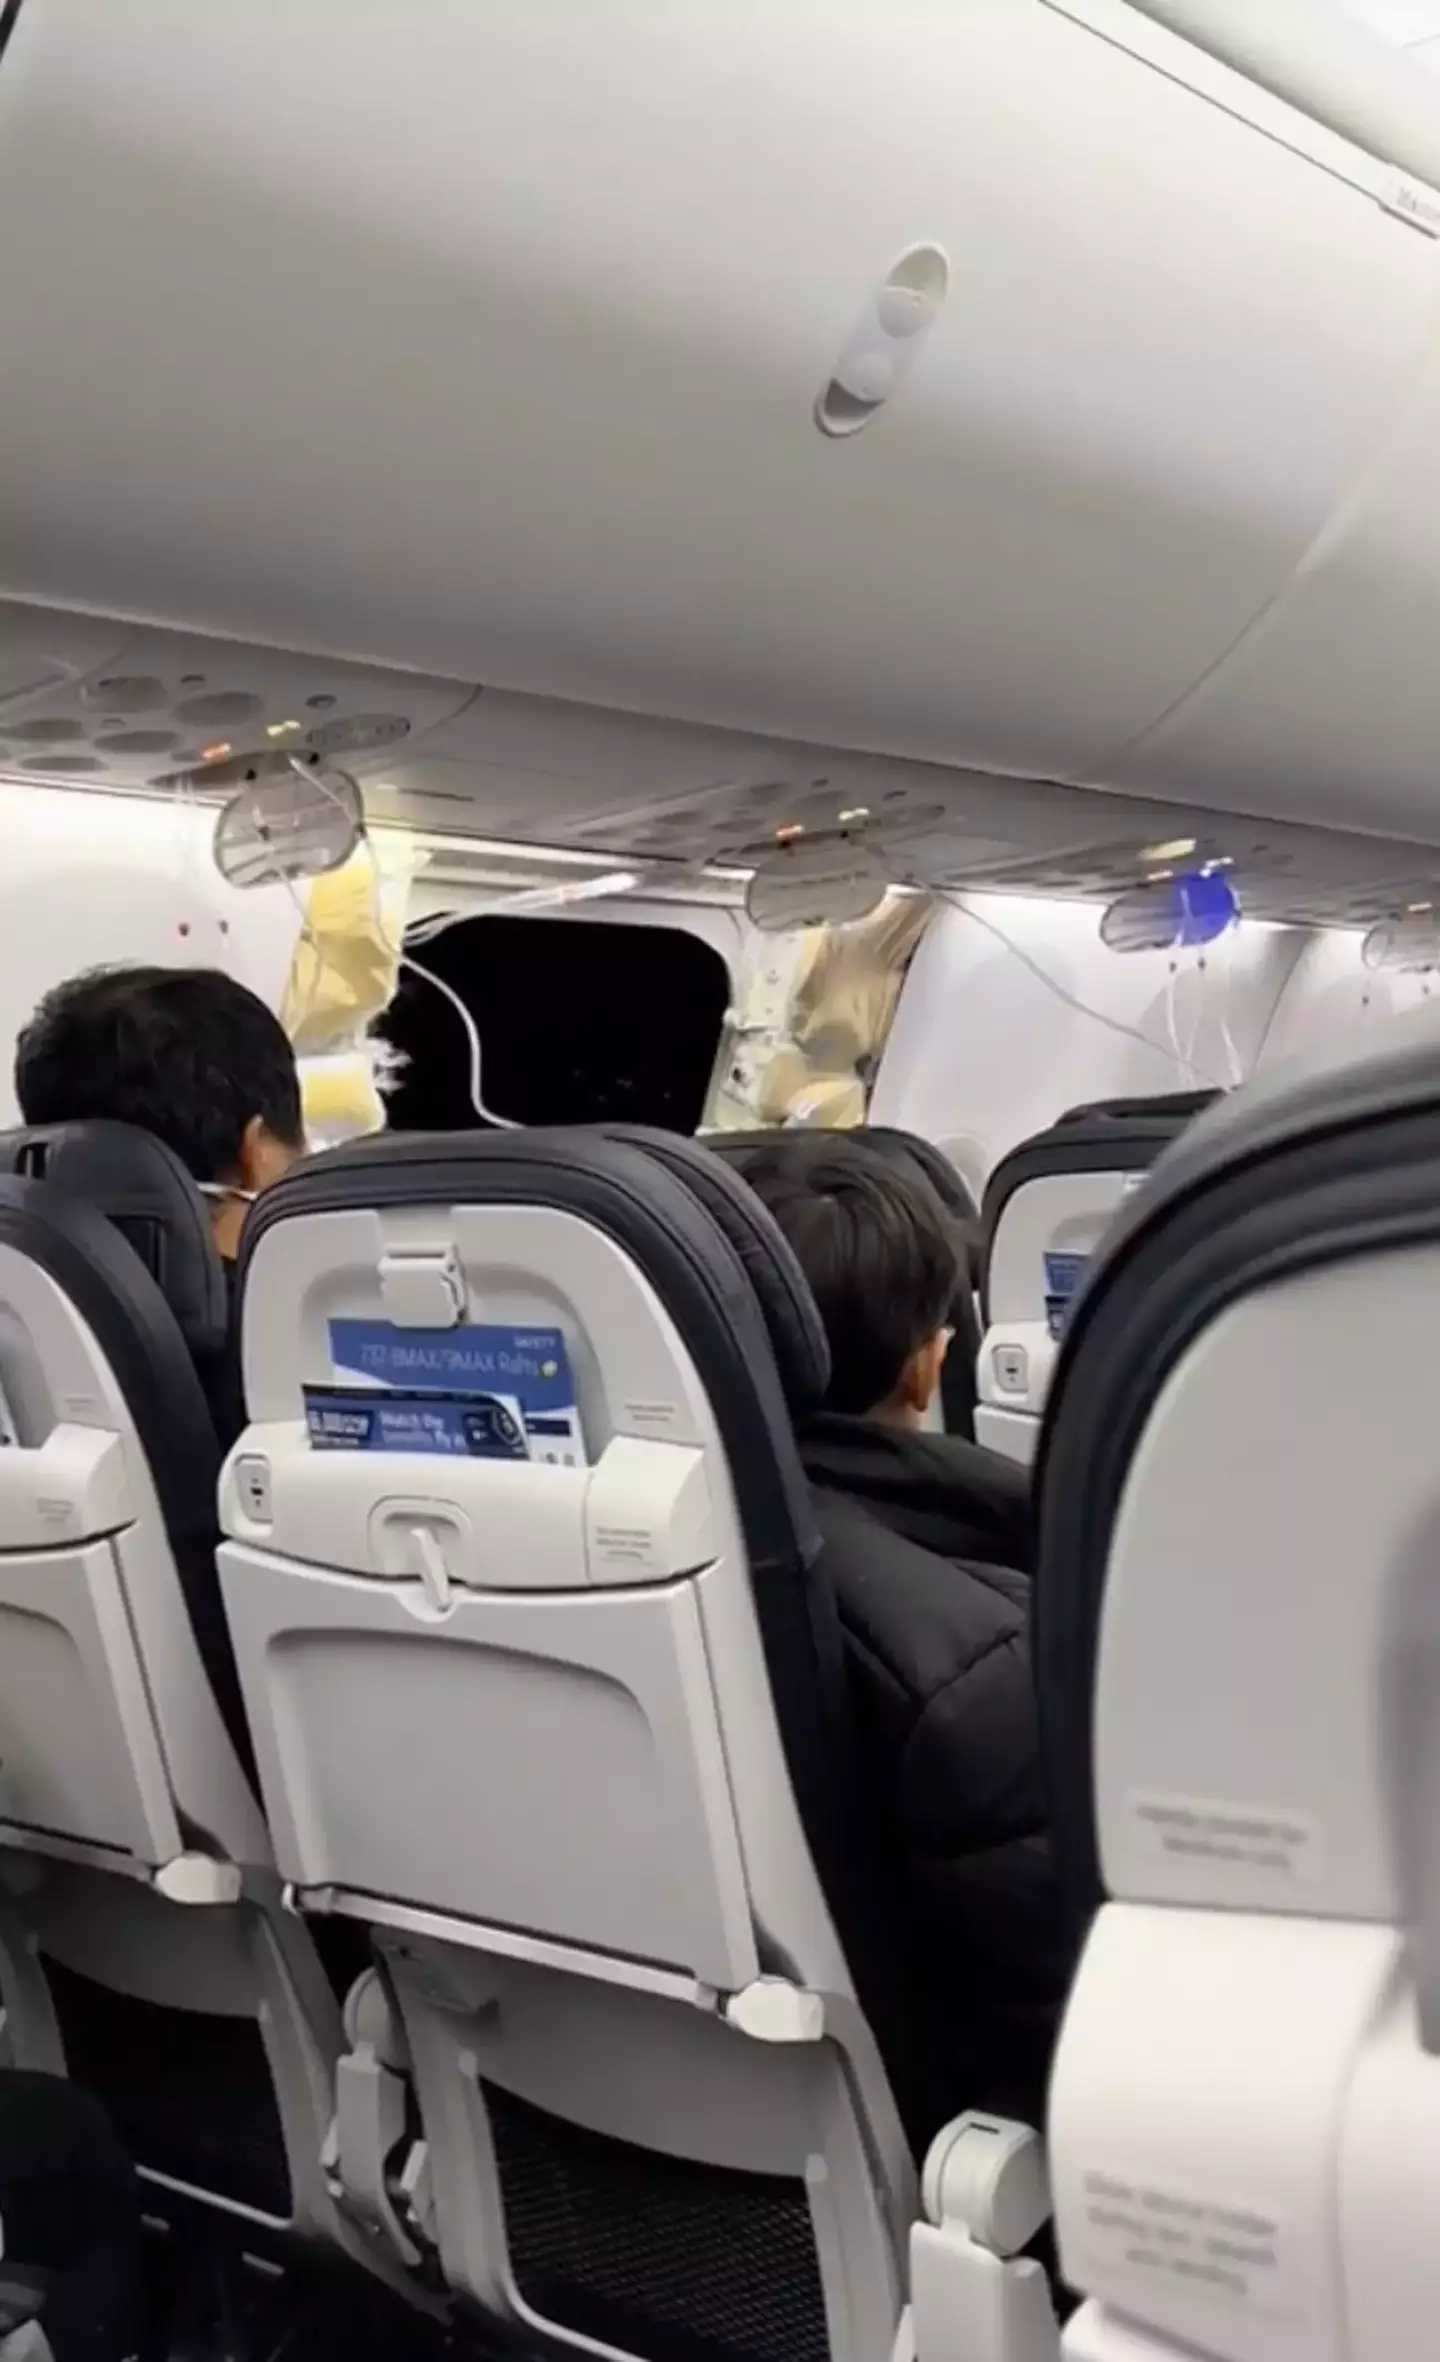 A passenger posted a video of the incident.